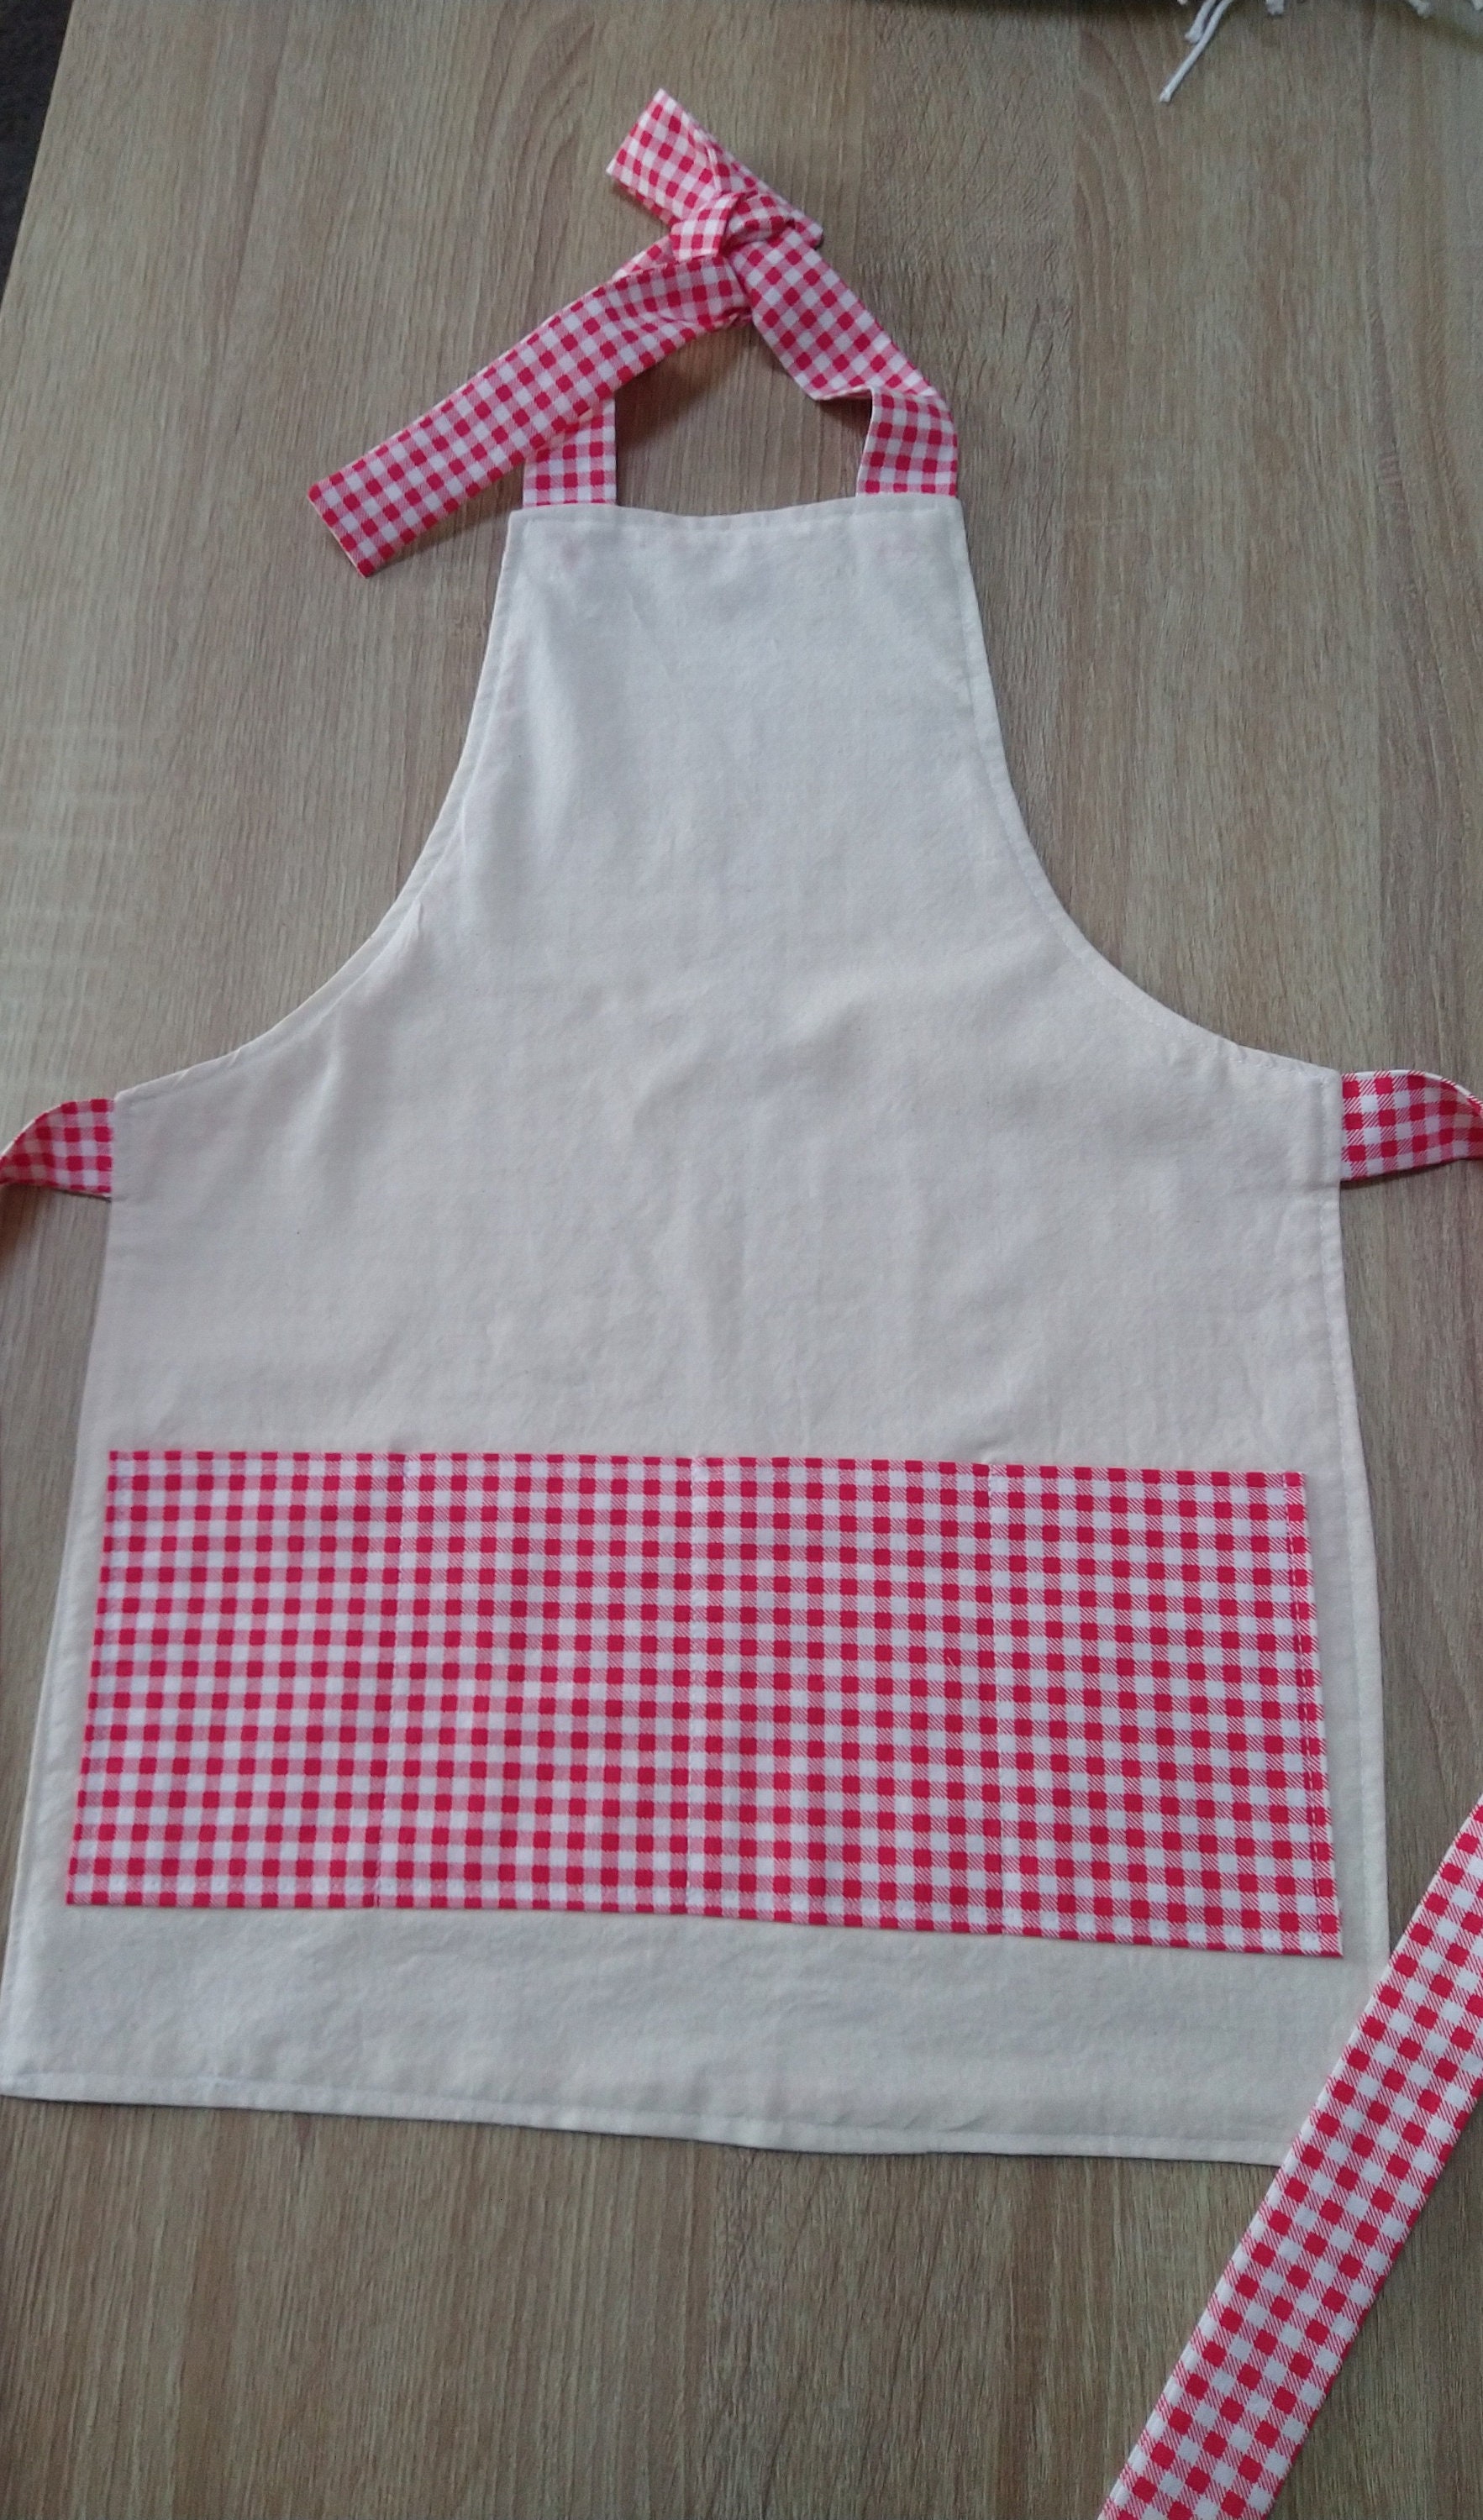 Nylon Childrens Art Apron, Red Apron for kids, Painting Apron for child, kids  play apron, Girls Apron red color, child size apron